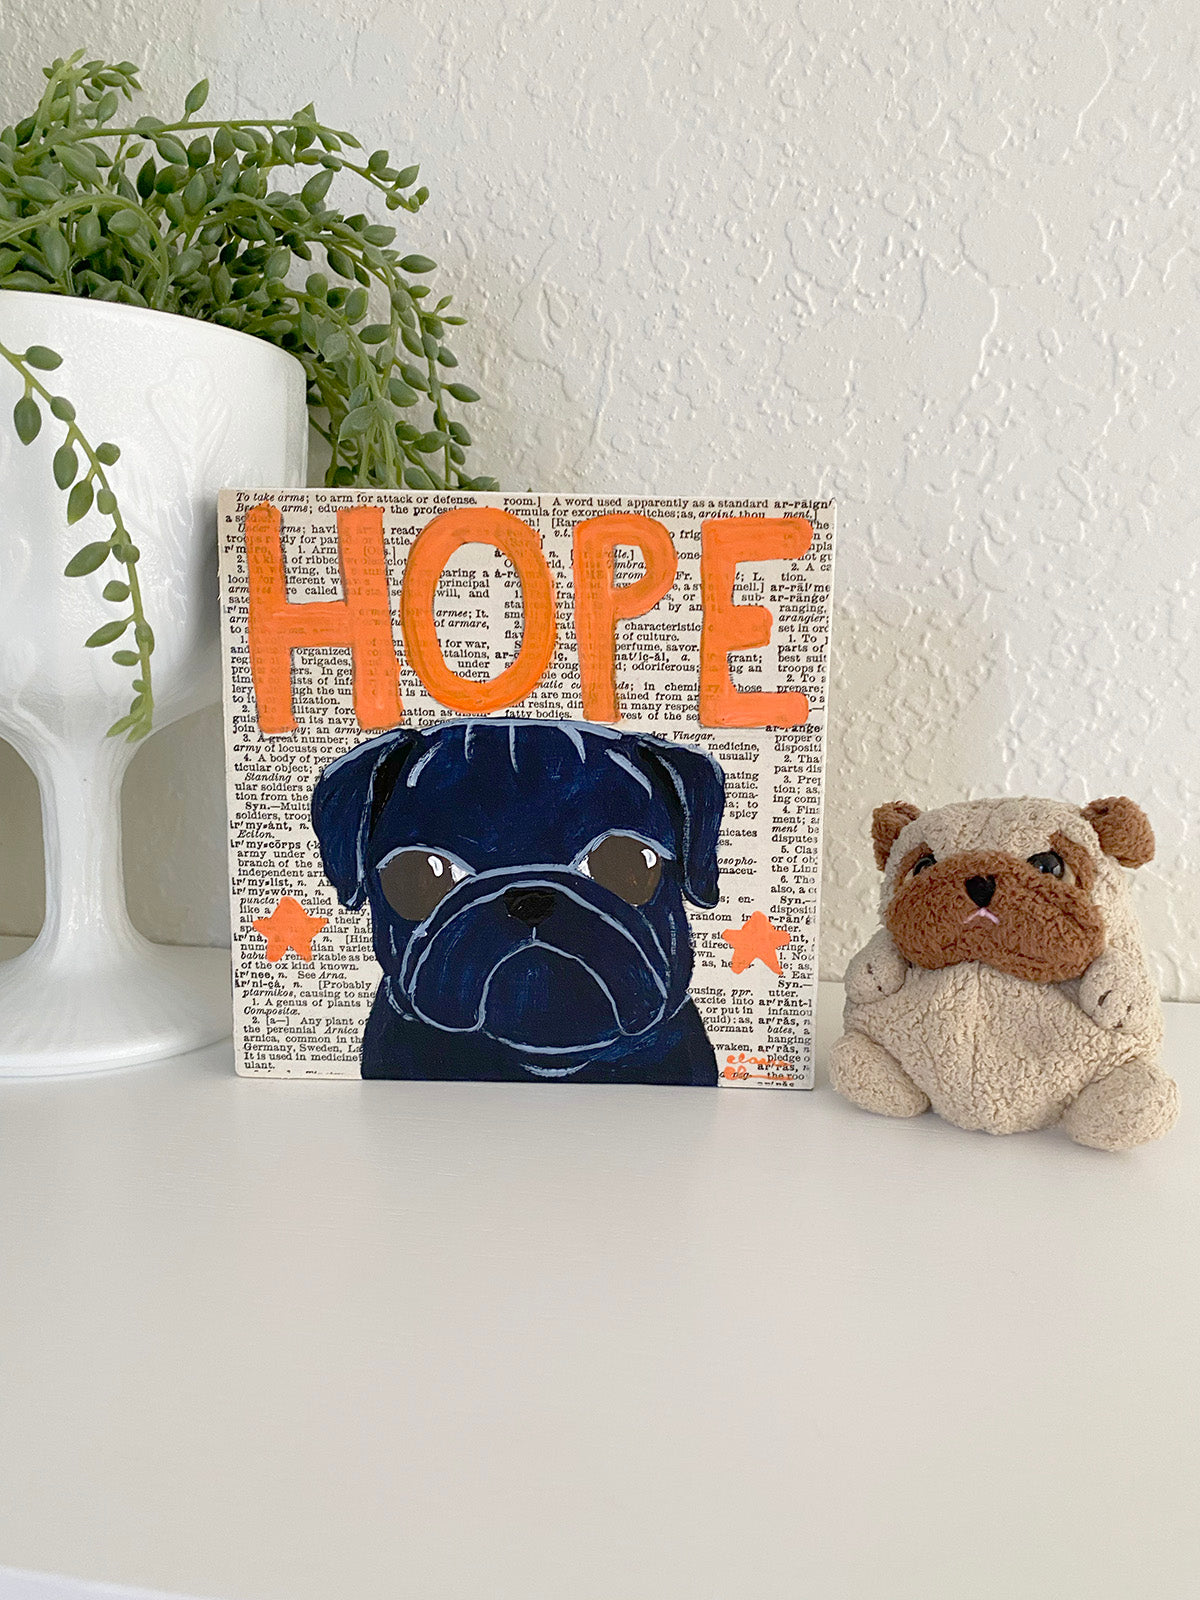 Hope - Original Word of the Year Painting